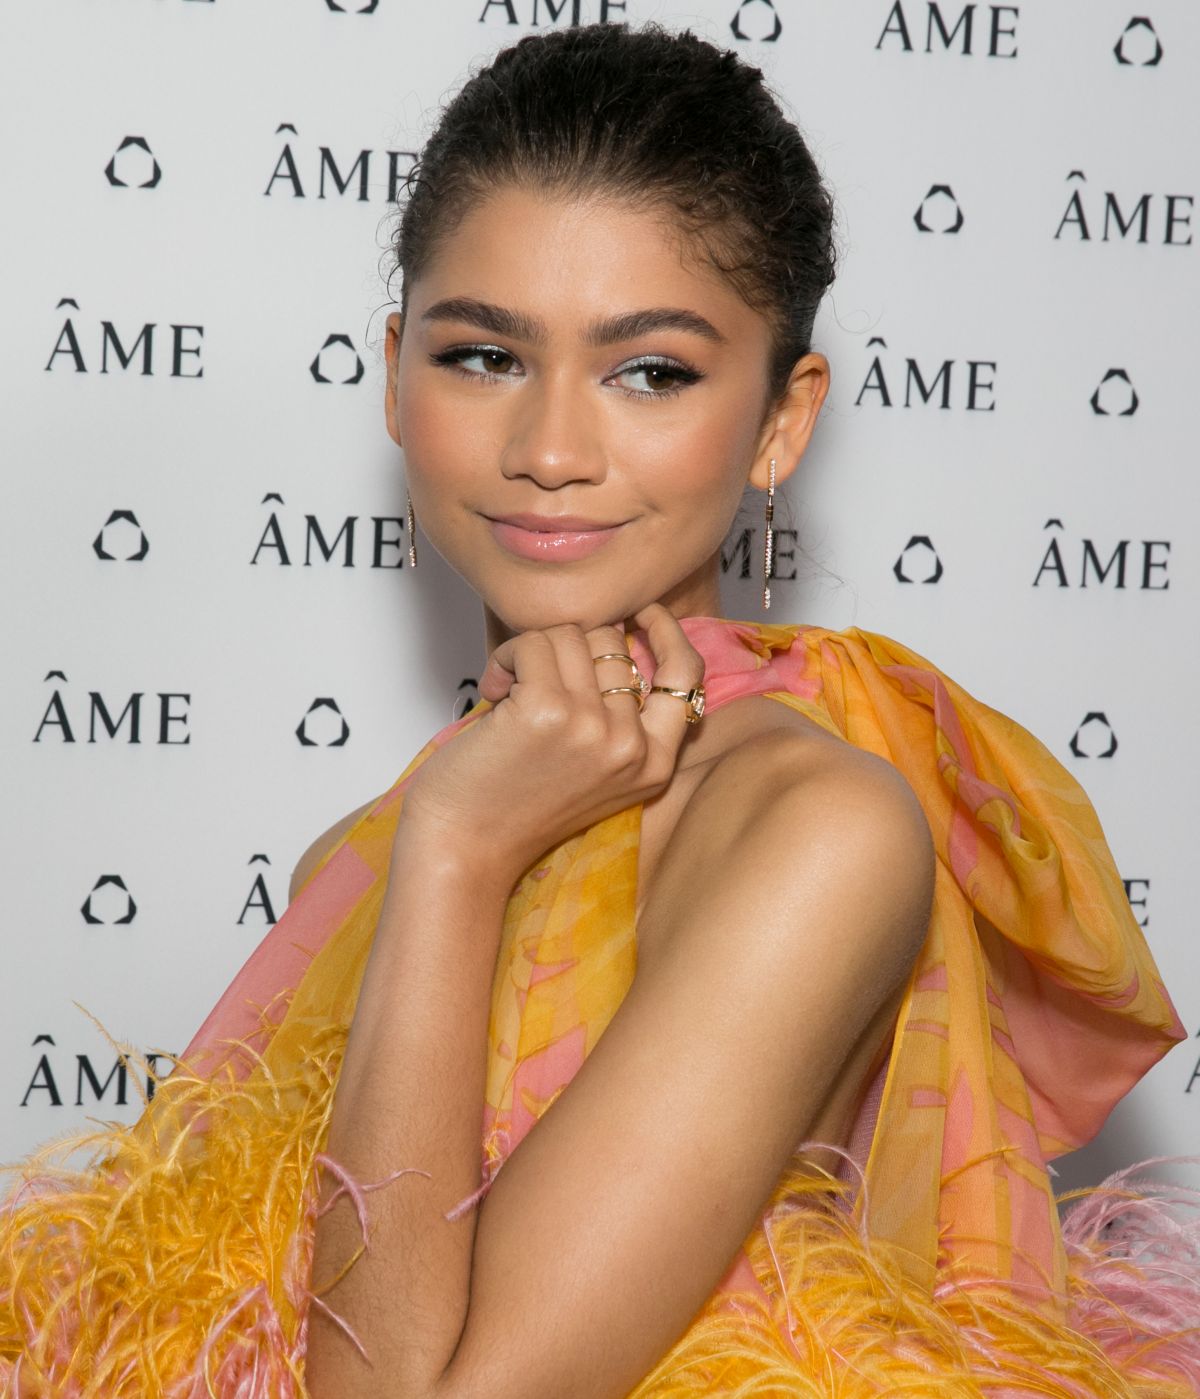 ZENDAYA COLEMAN at Ame Jewelry Launch in Los Angeles 12/13/2018 - HawtCelebs